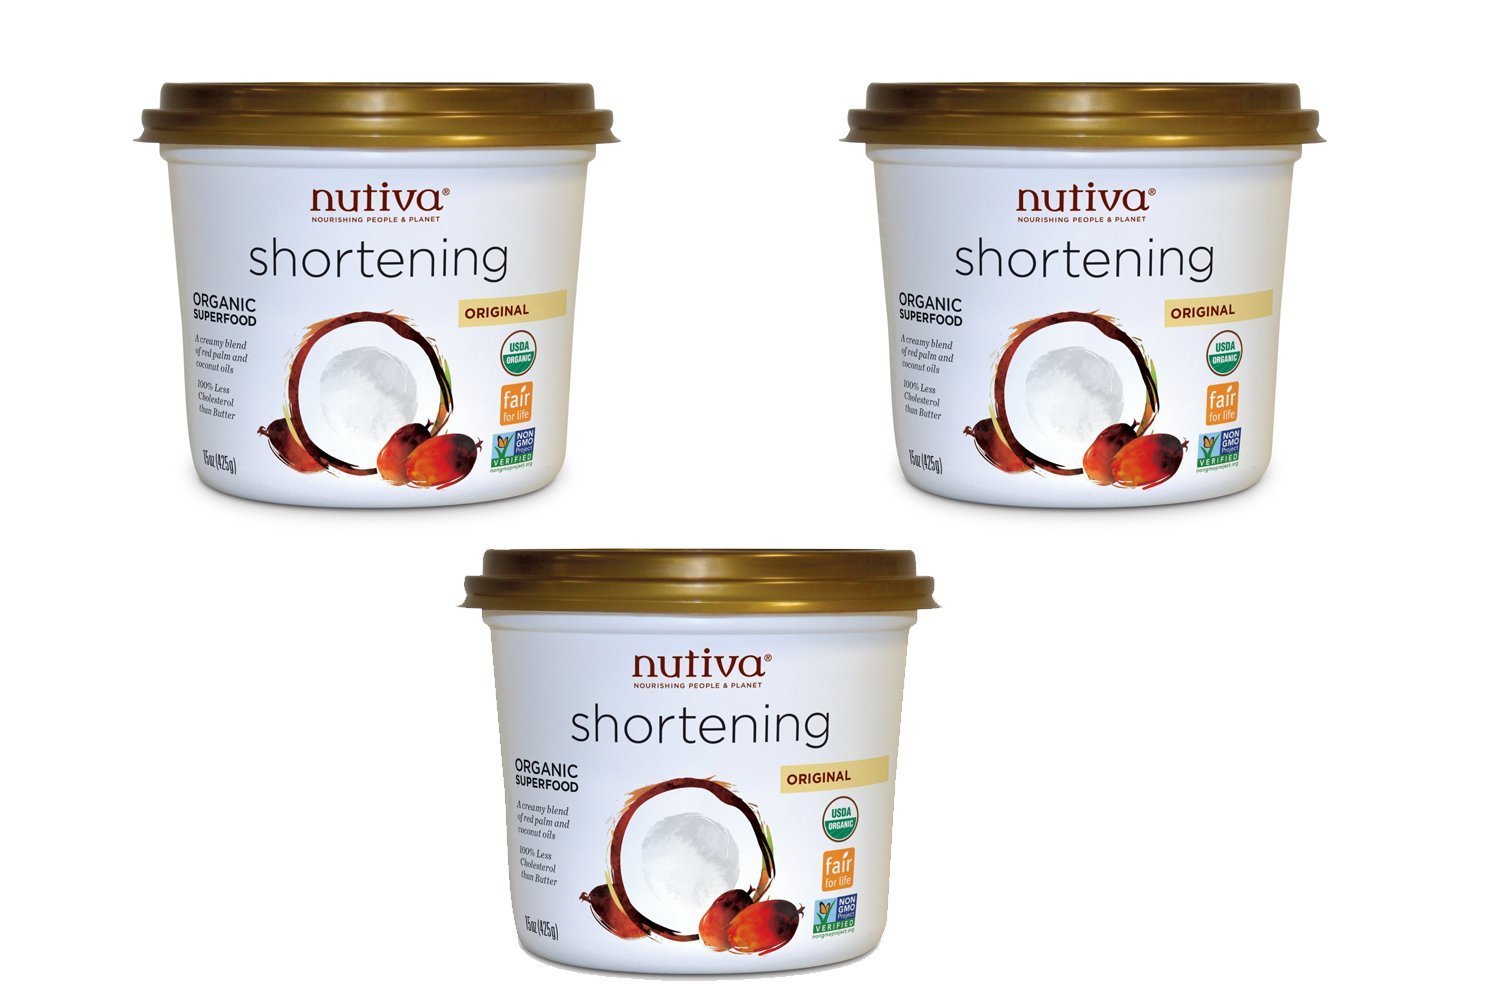 Nutiva Red Palm Shortening Organic Superfood, 15 Ounce [3 Pack] 